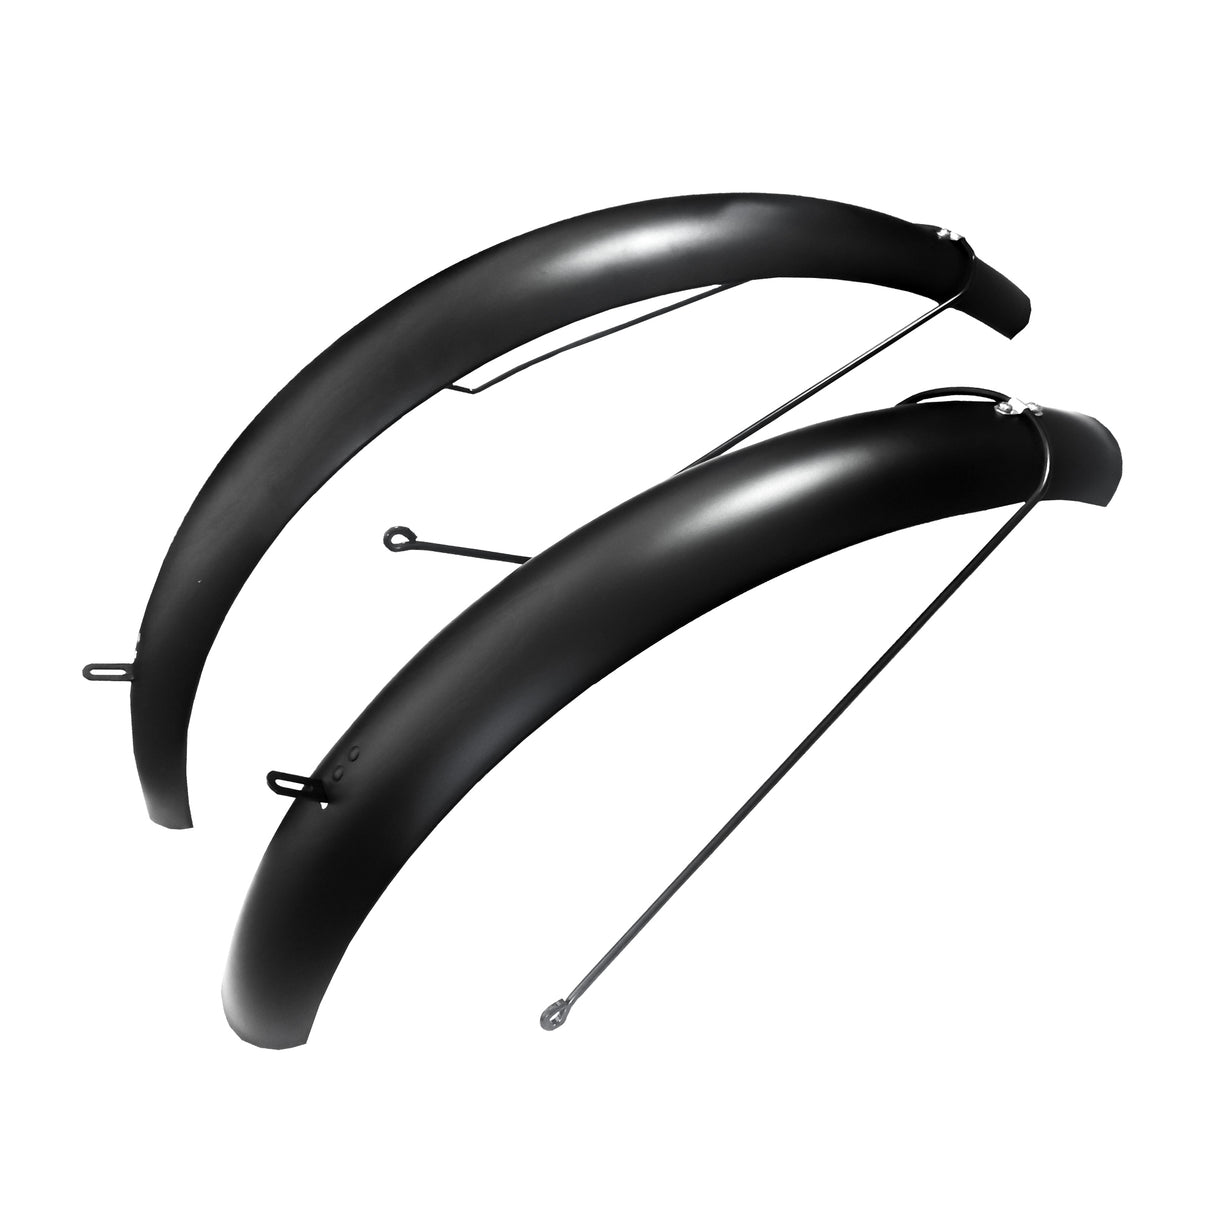 Bicycle Rear Rack & Mudguard Set for Ebike R5pro